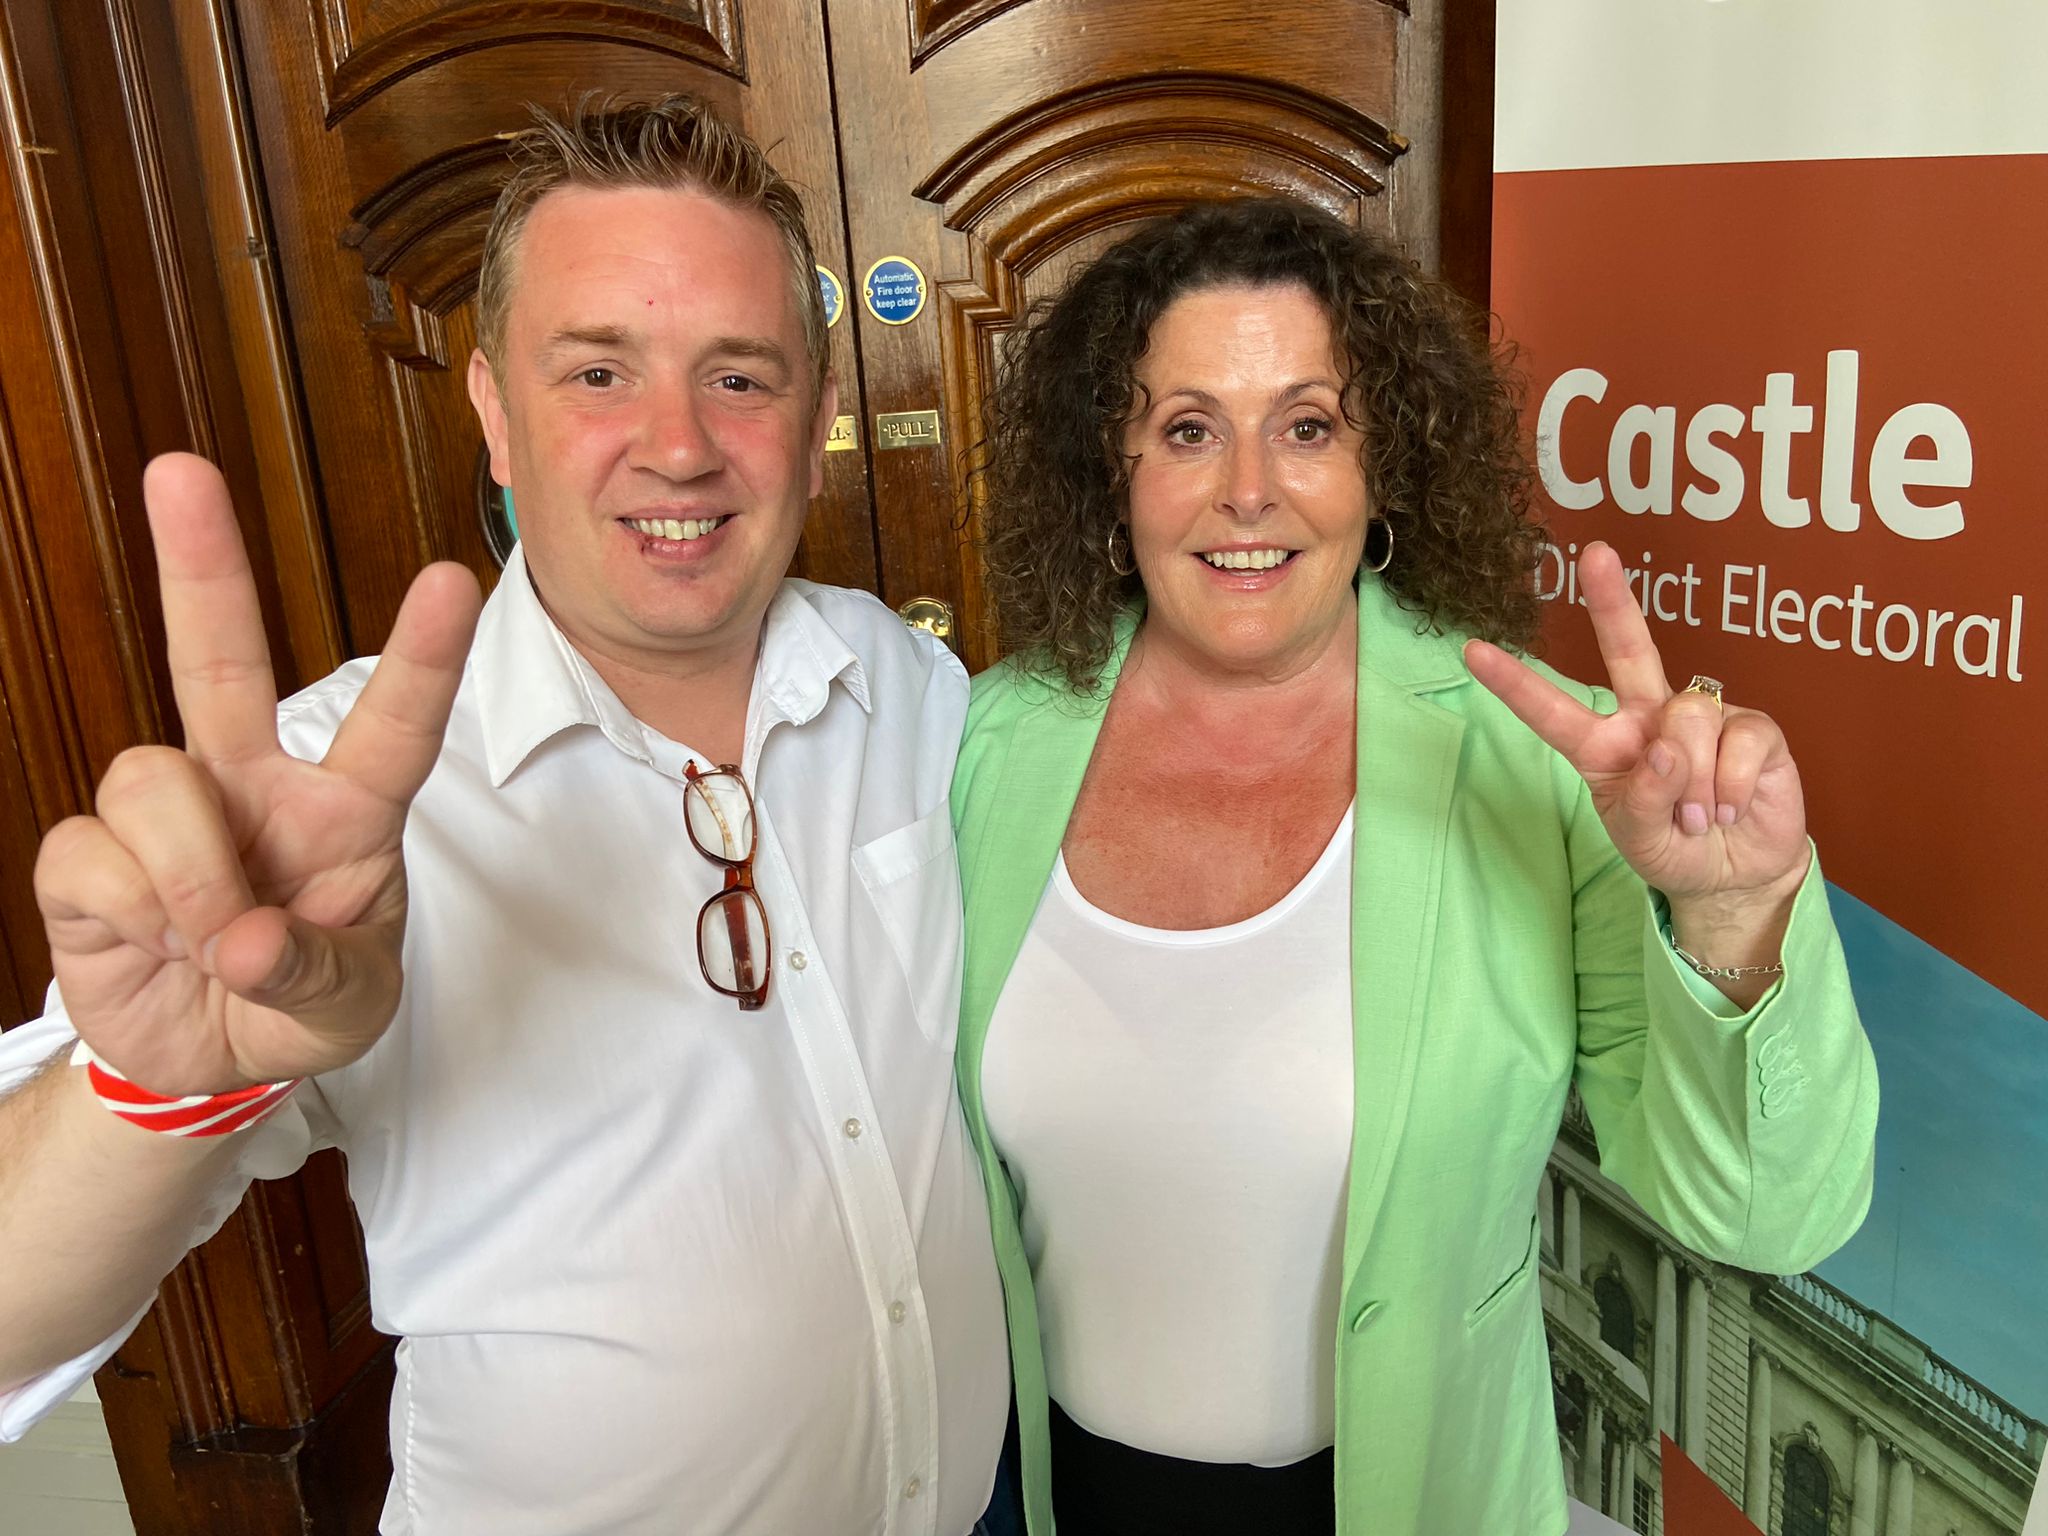 DOUBLE TEAM: Sinn Féin secured two councillors in Castle DEA for the first time thanks to Conor Maskey and Brónach Anglin